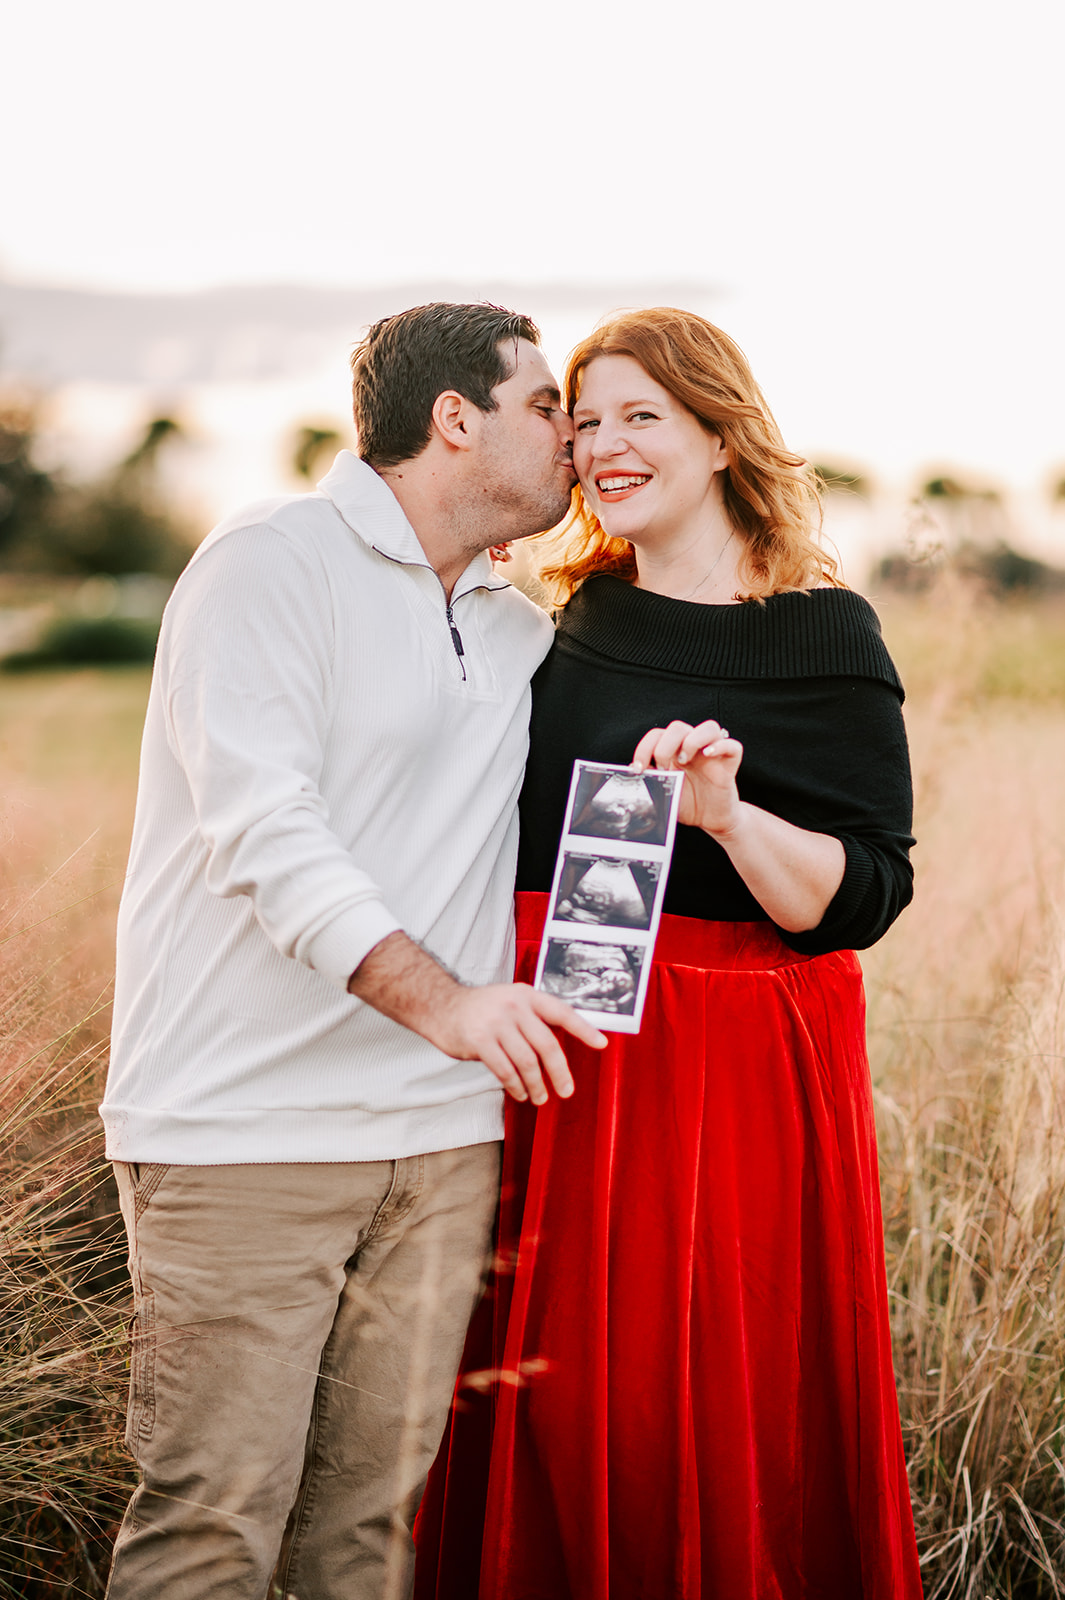 A husband in a white sweater kisses his pregnant wife in a red skirt while standing in a field of tall grass